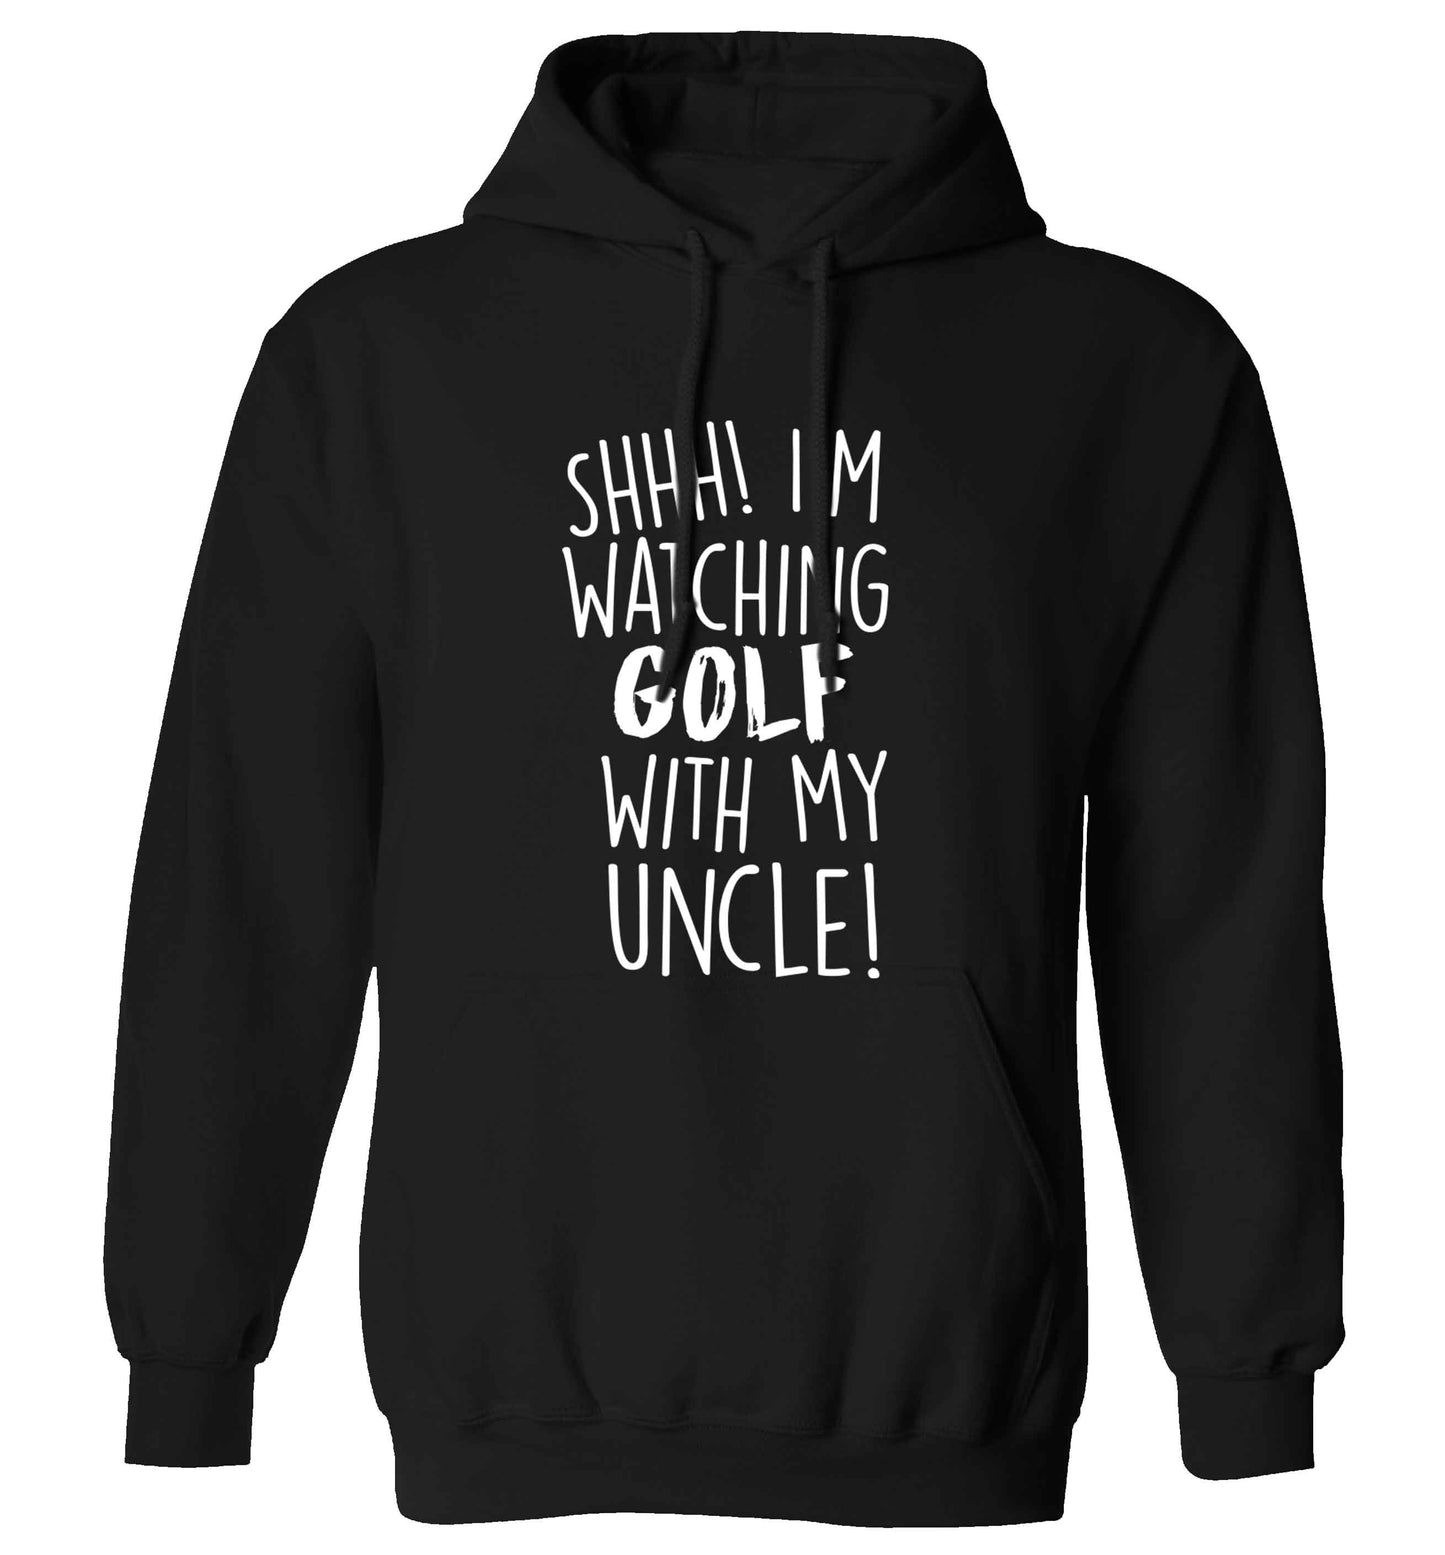 Shh I'm watching golf with my uncle adults unisex black hoodie 2XL